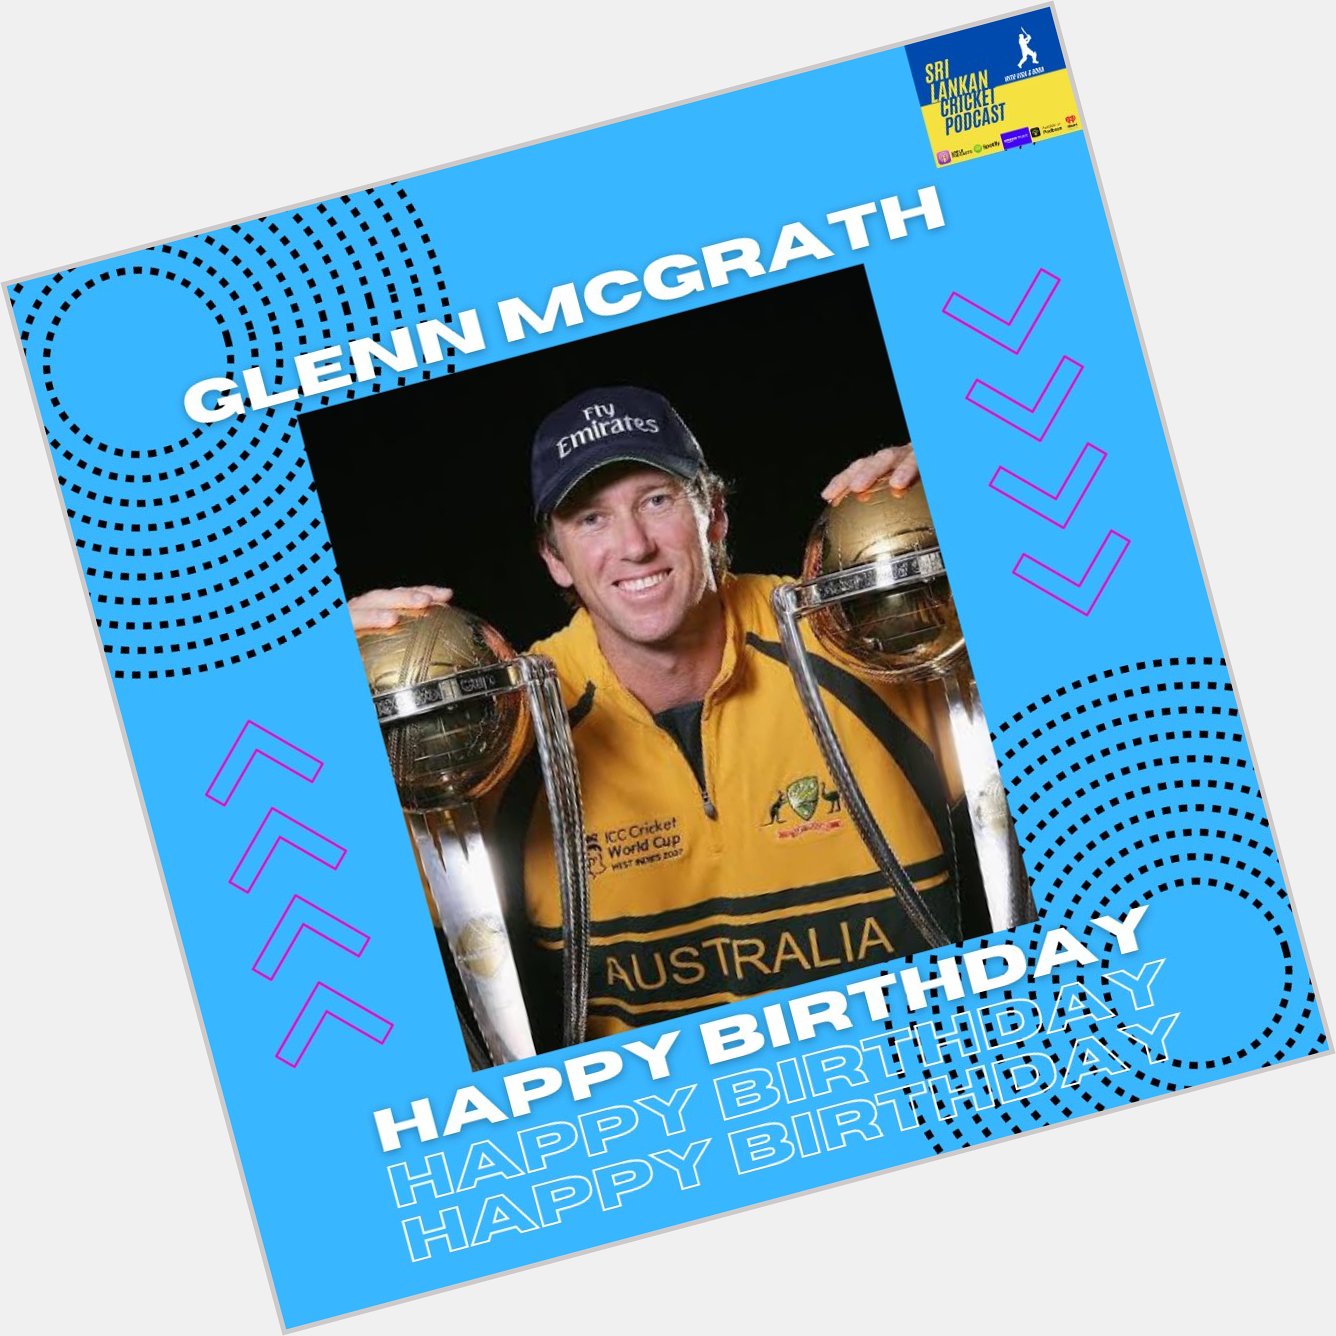 Man who holds the record for Most wickets (71) in World cups, Glenn McGrath turns 53 today.
Happy birthday 